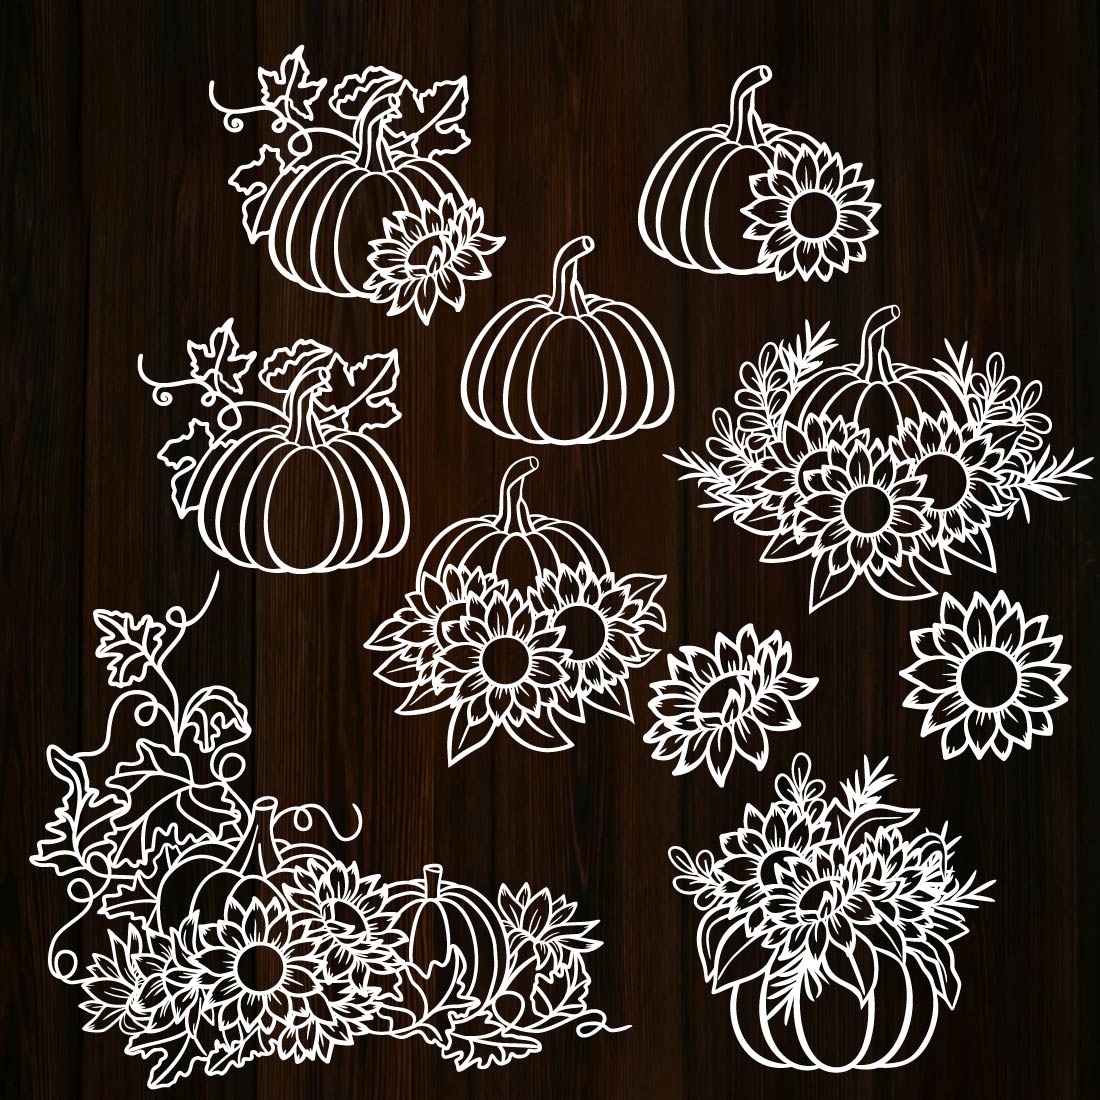 Floral Sunflower And Pumpkin Vector Autumn Illustration For Halloween Or Thanksgiving Preview Image.